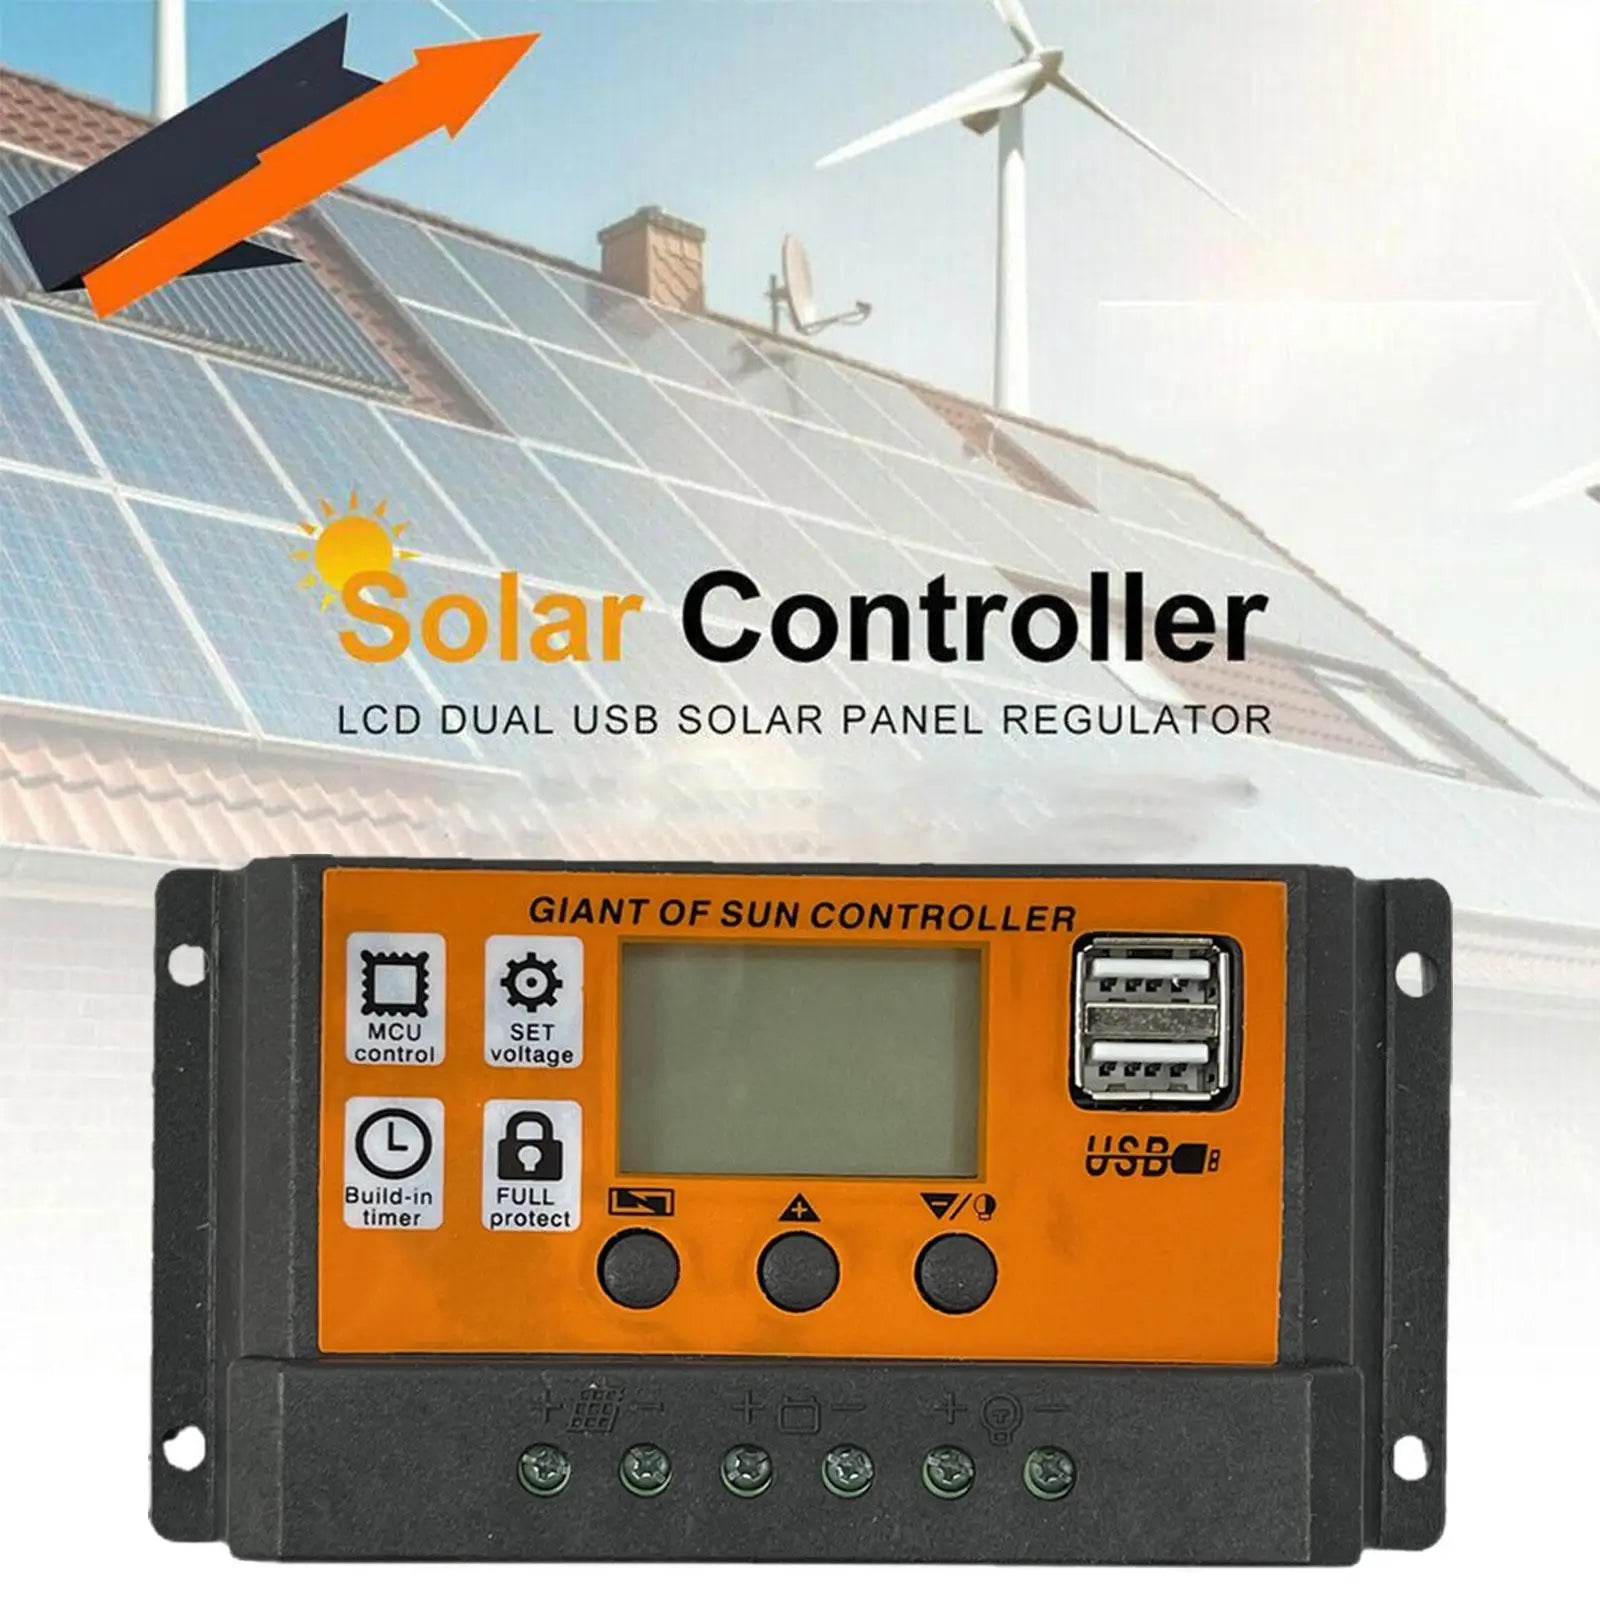 MPPT Solar Charge Controller with LCD display and features for safe and efficient charging.